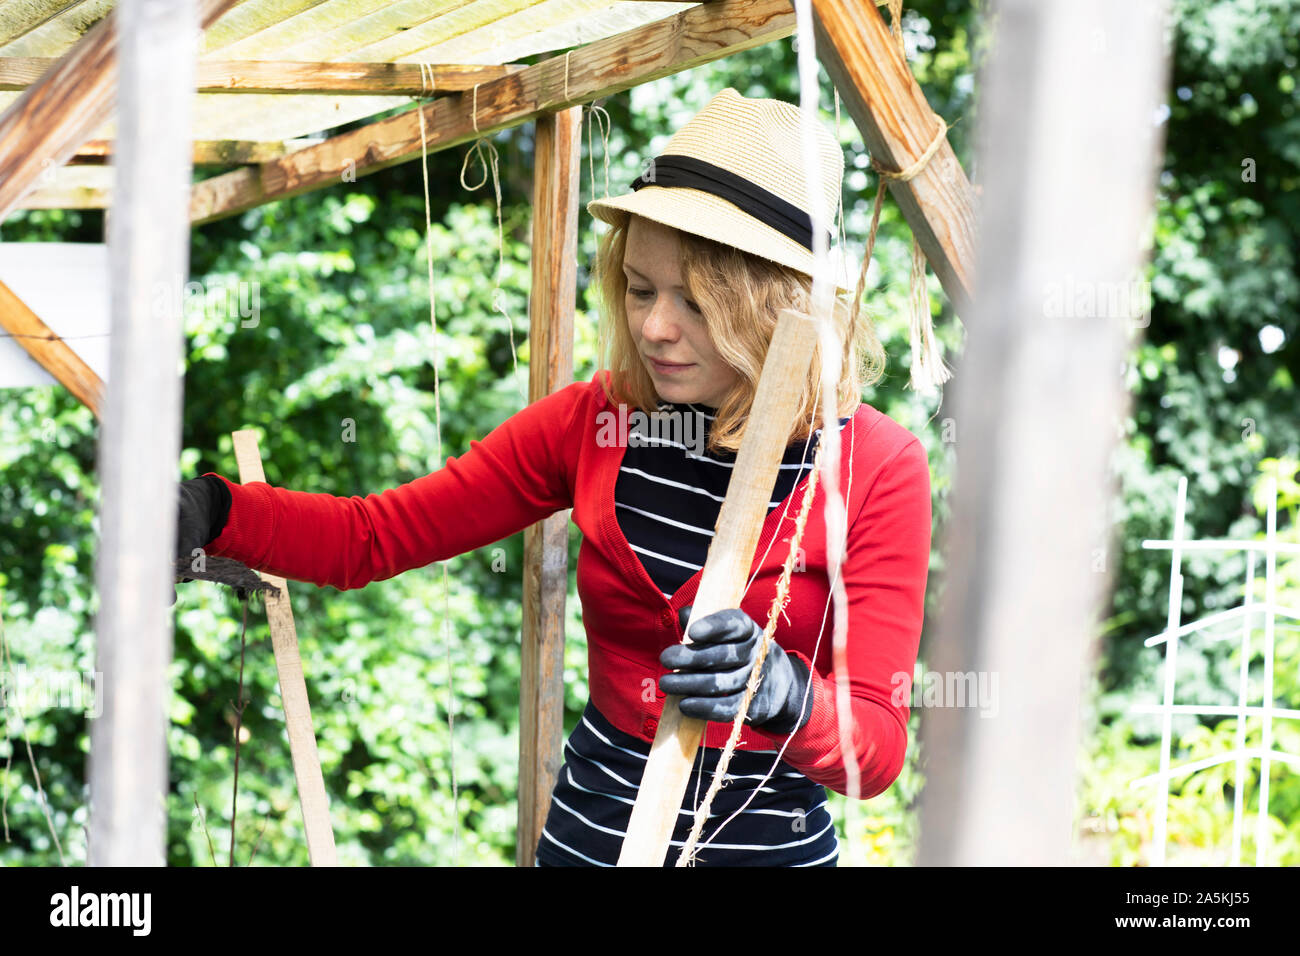 Mid adult woman constructing wooden shelter in her garden Stock Photo